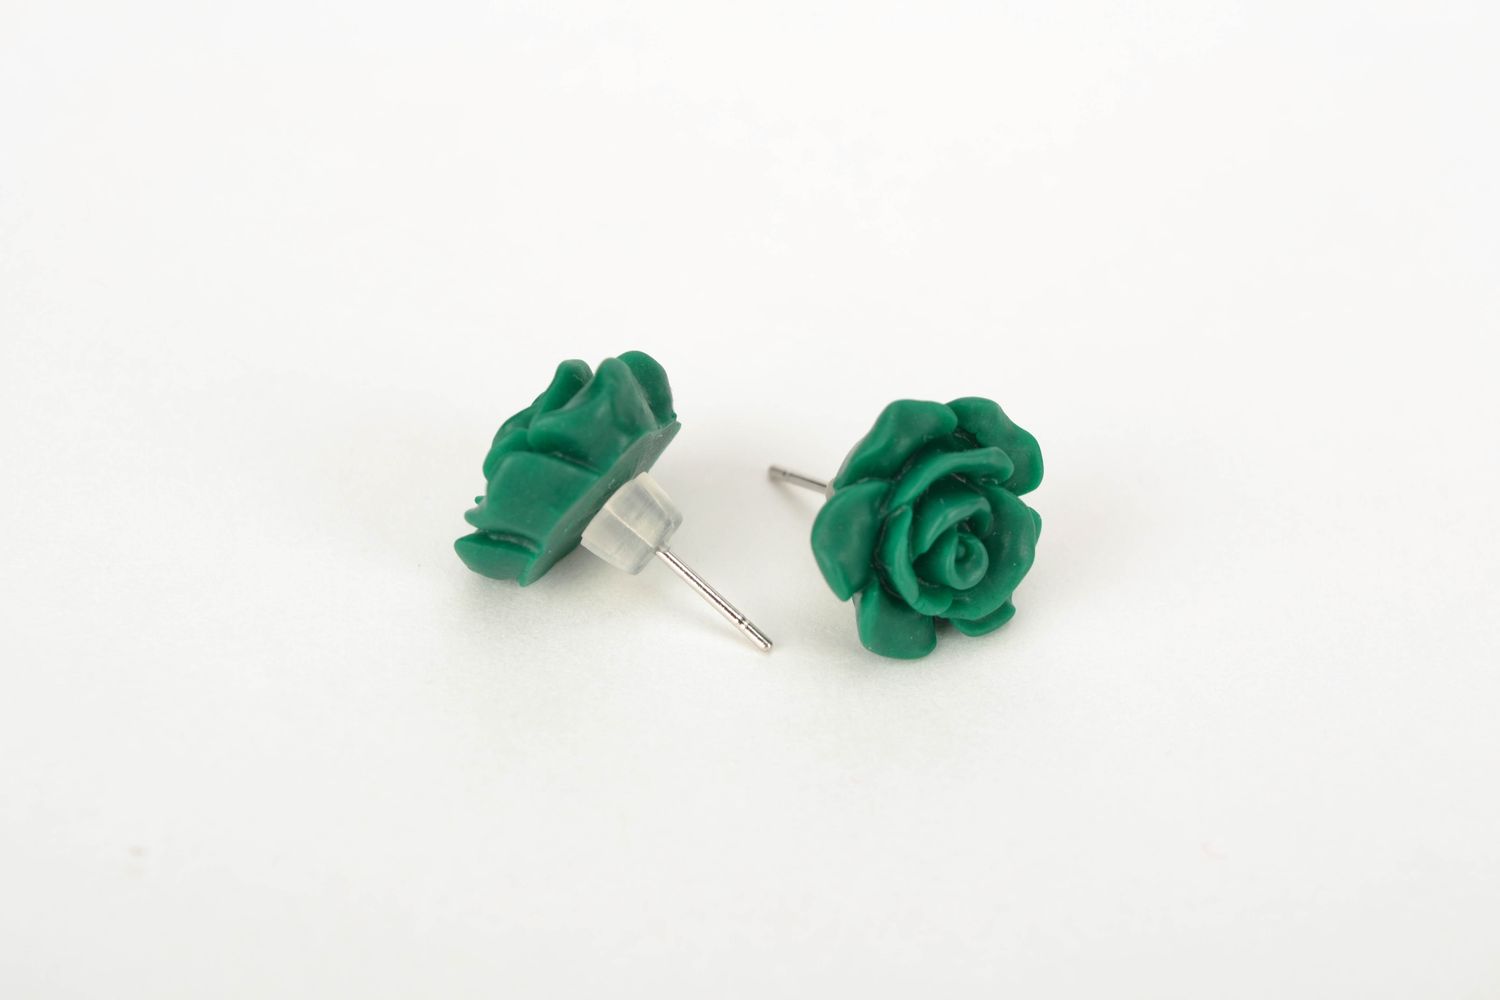 Polymer clay stud earrings in the shape of green flowers photo 4